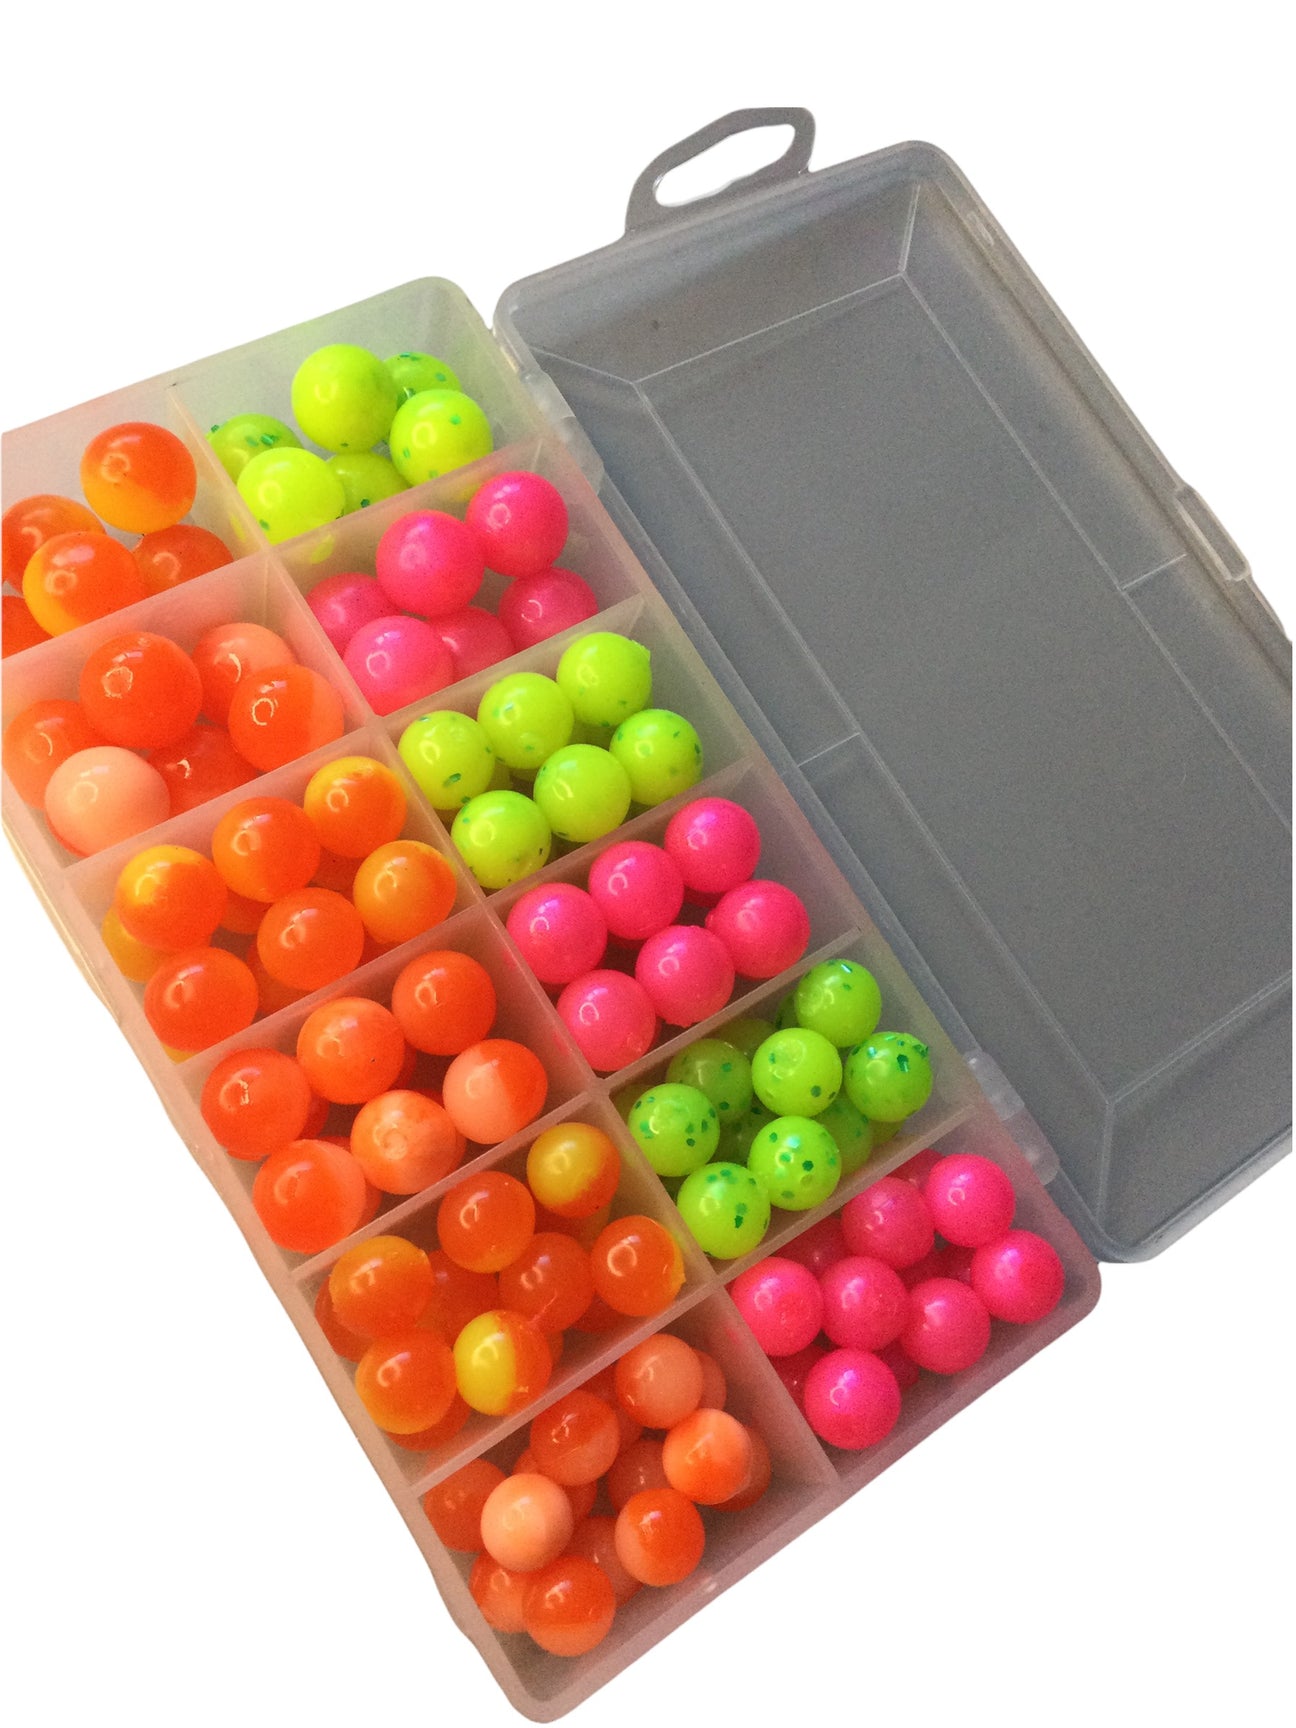 100pcs/lot Fishing Beads Stopper 4mm 5mm 6mm 8mm 10mm Luminous Round  Fishing Space Beans Stops Soft Rubber Rig Lure Accessories